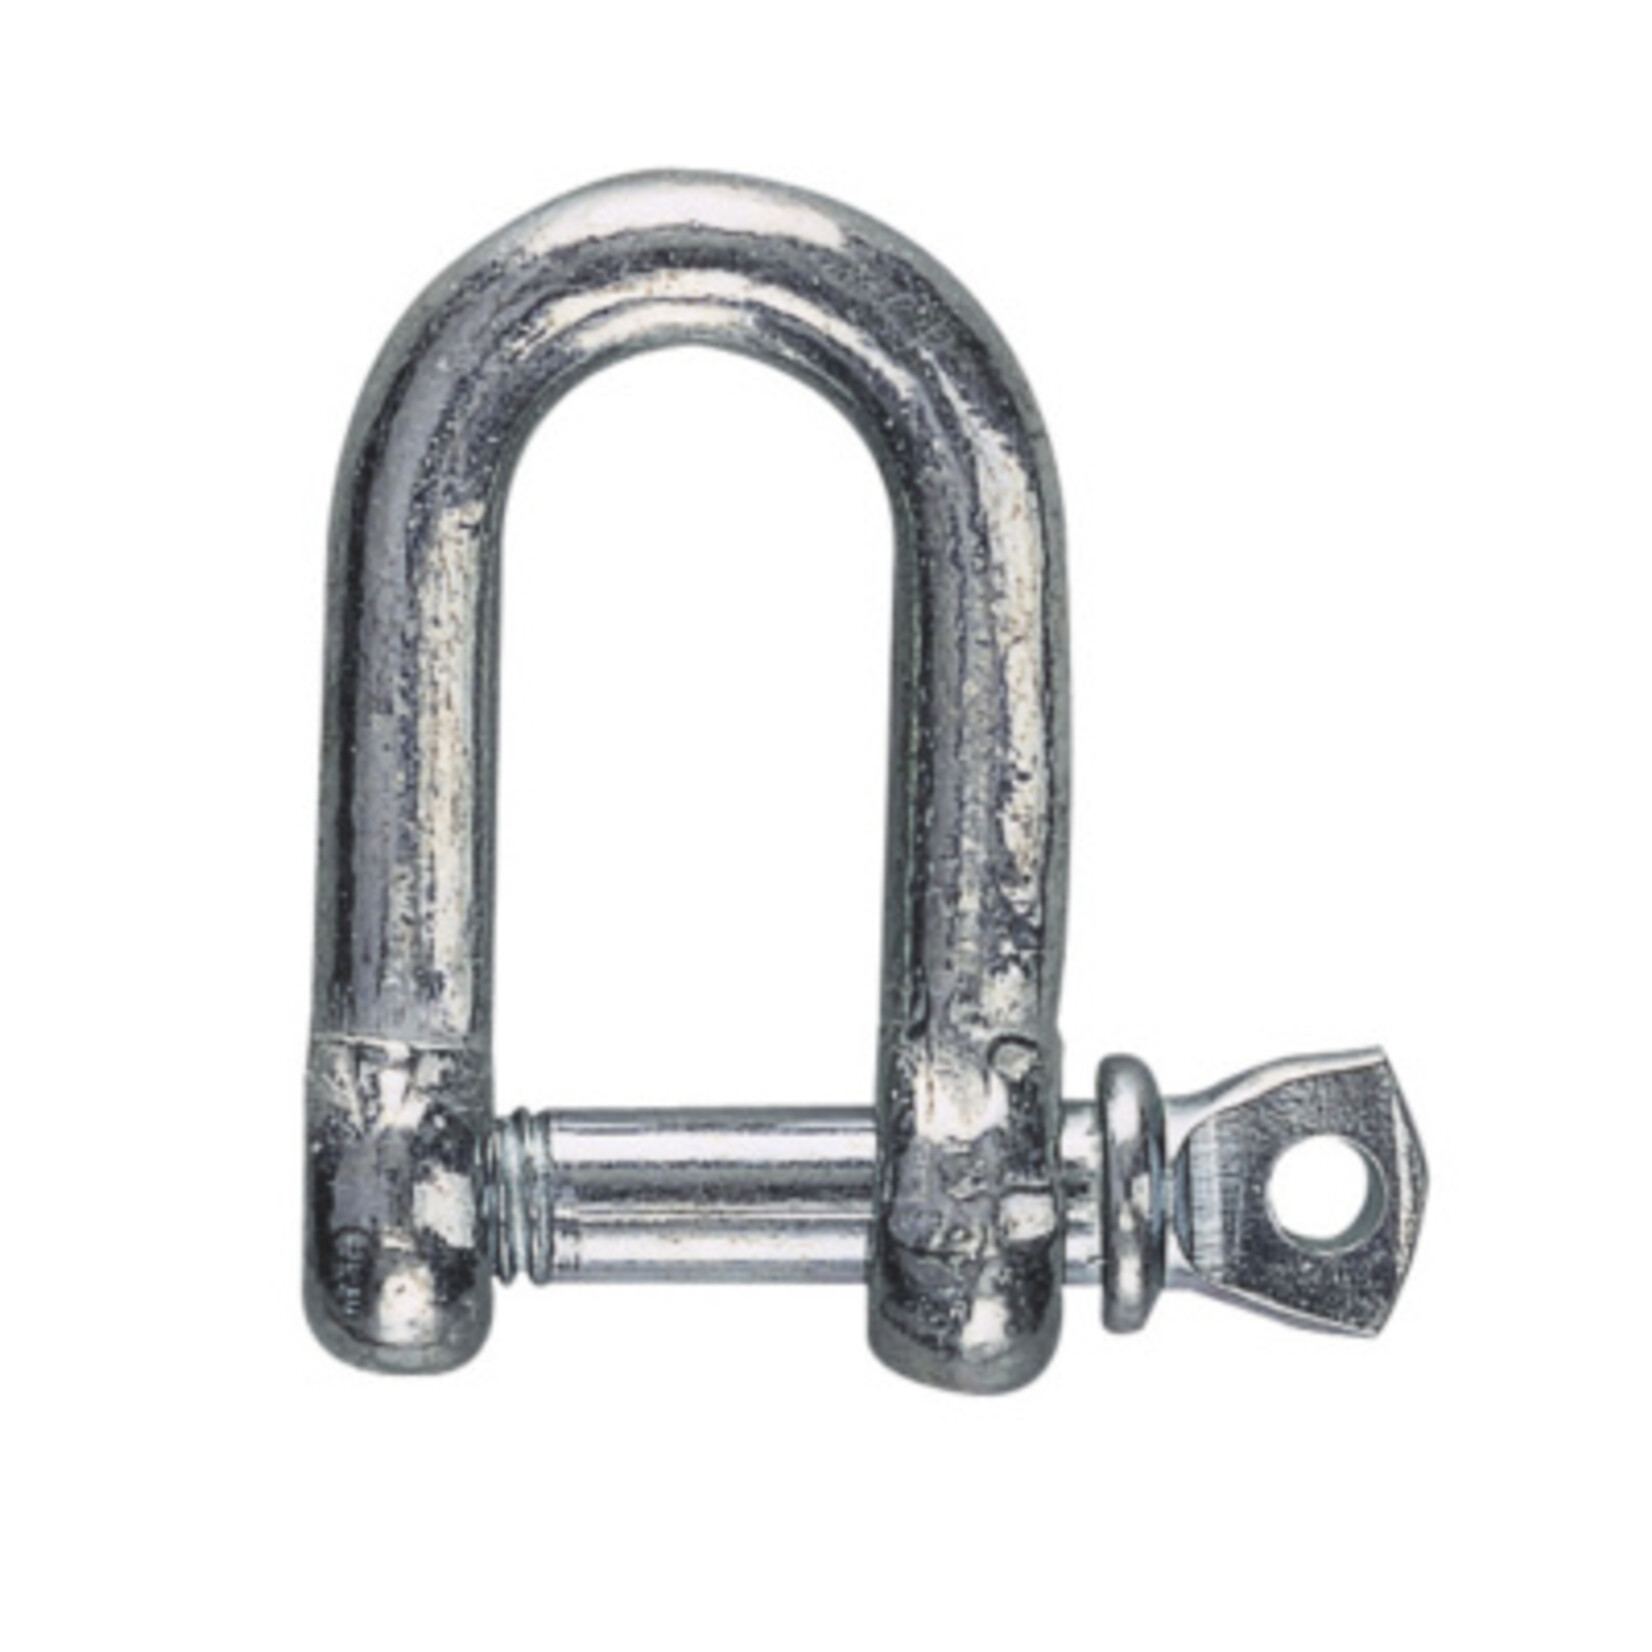 Plastimo Shackle gal d-shap dia 12mm yellow code